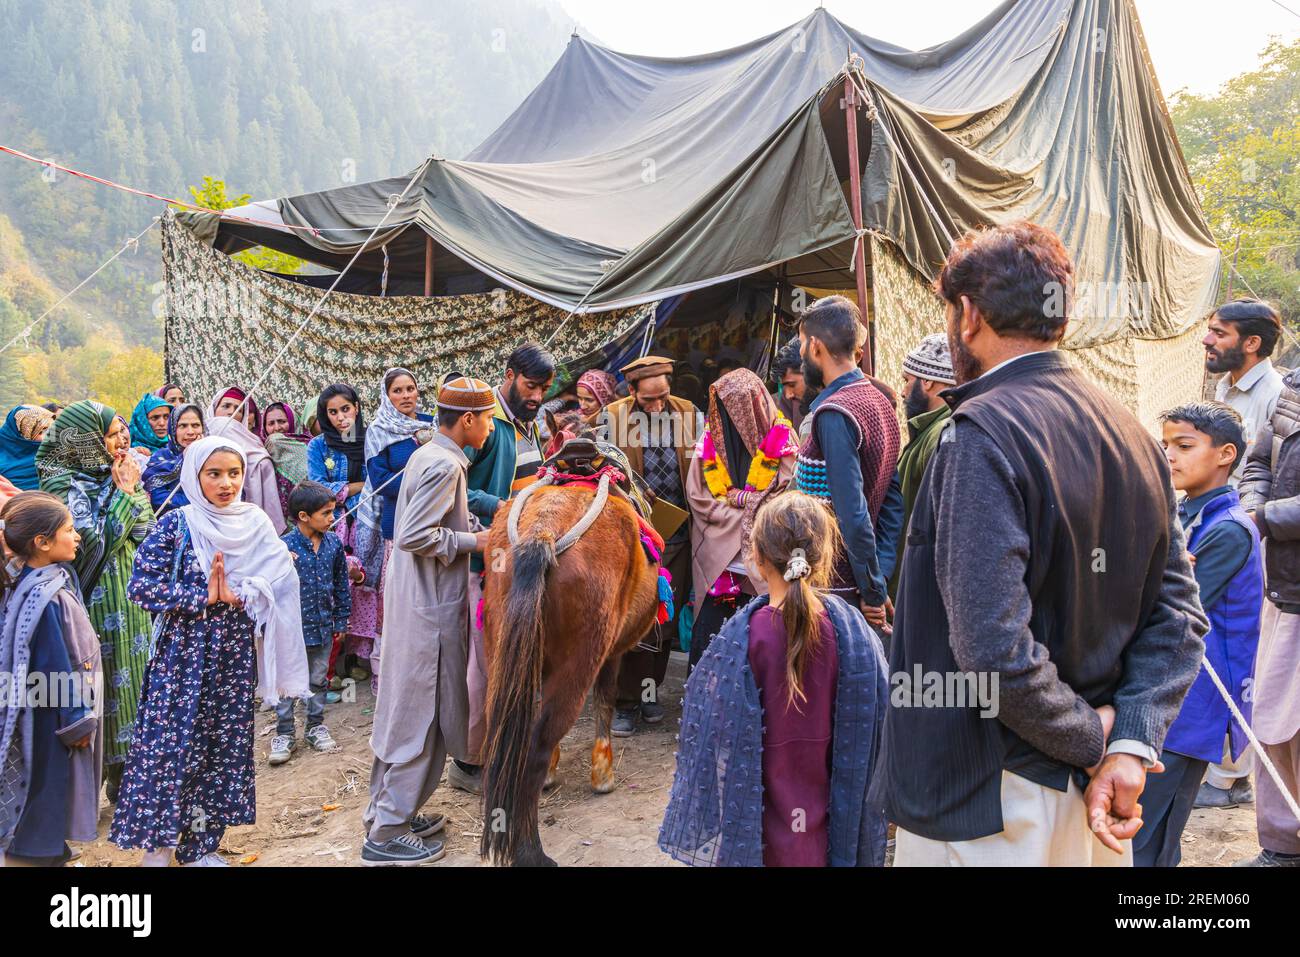 Kangan, Jammu and Kashmir, India. October 27, 2022. A young bride in a black veil getting on a horse at a village wedding in Jammu and Kashmir. Stock Photo